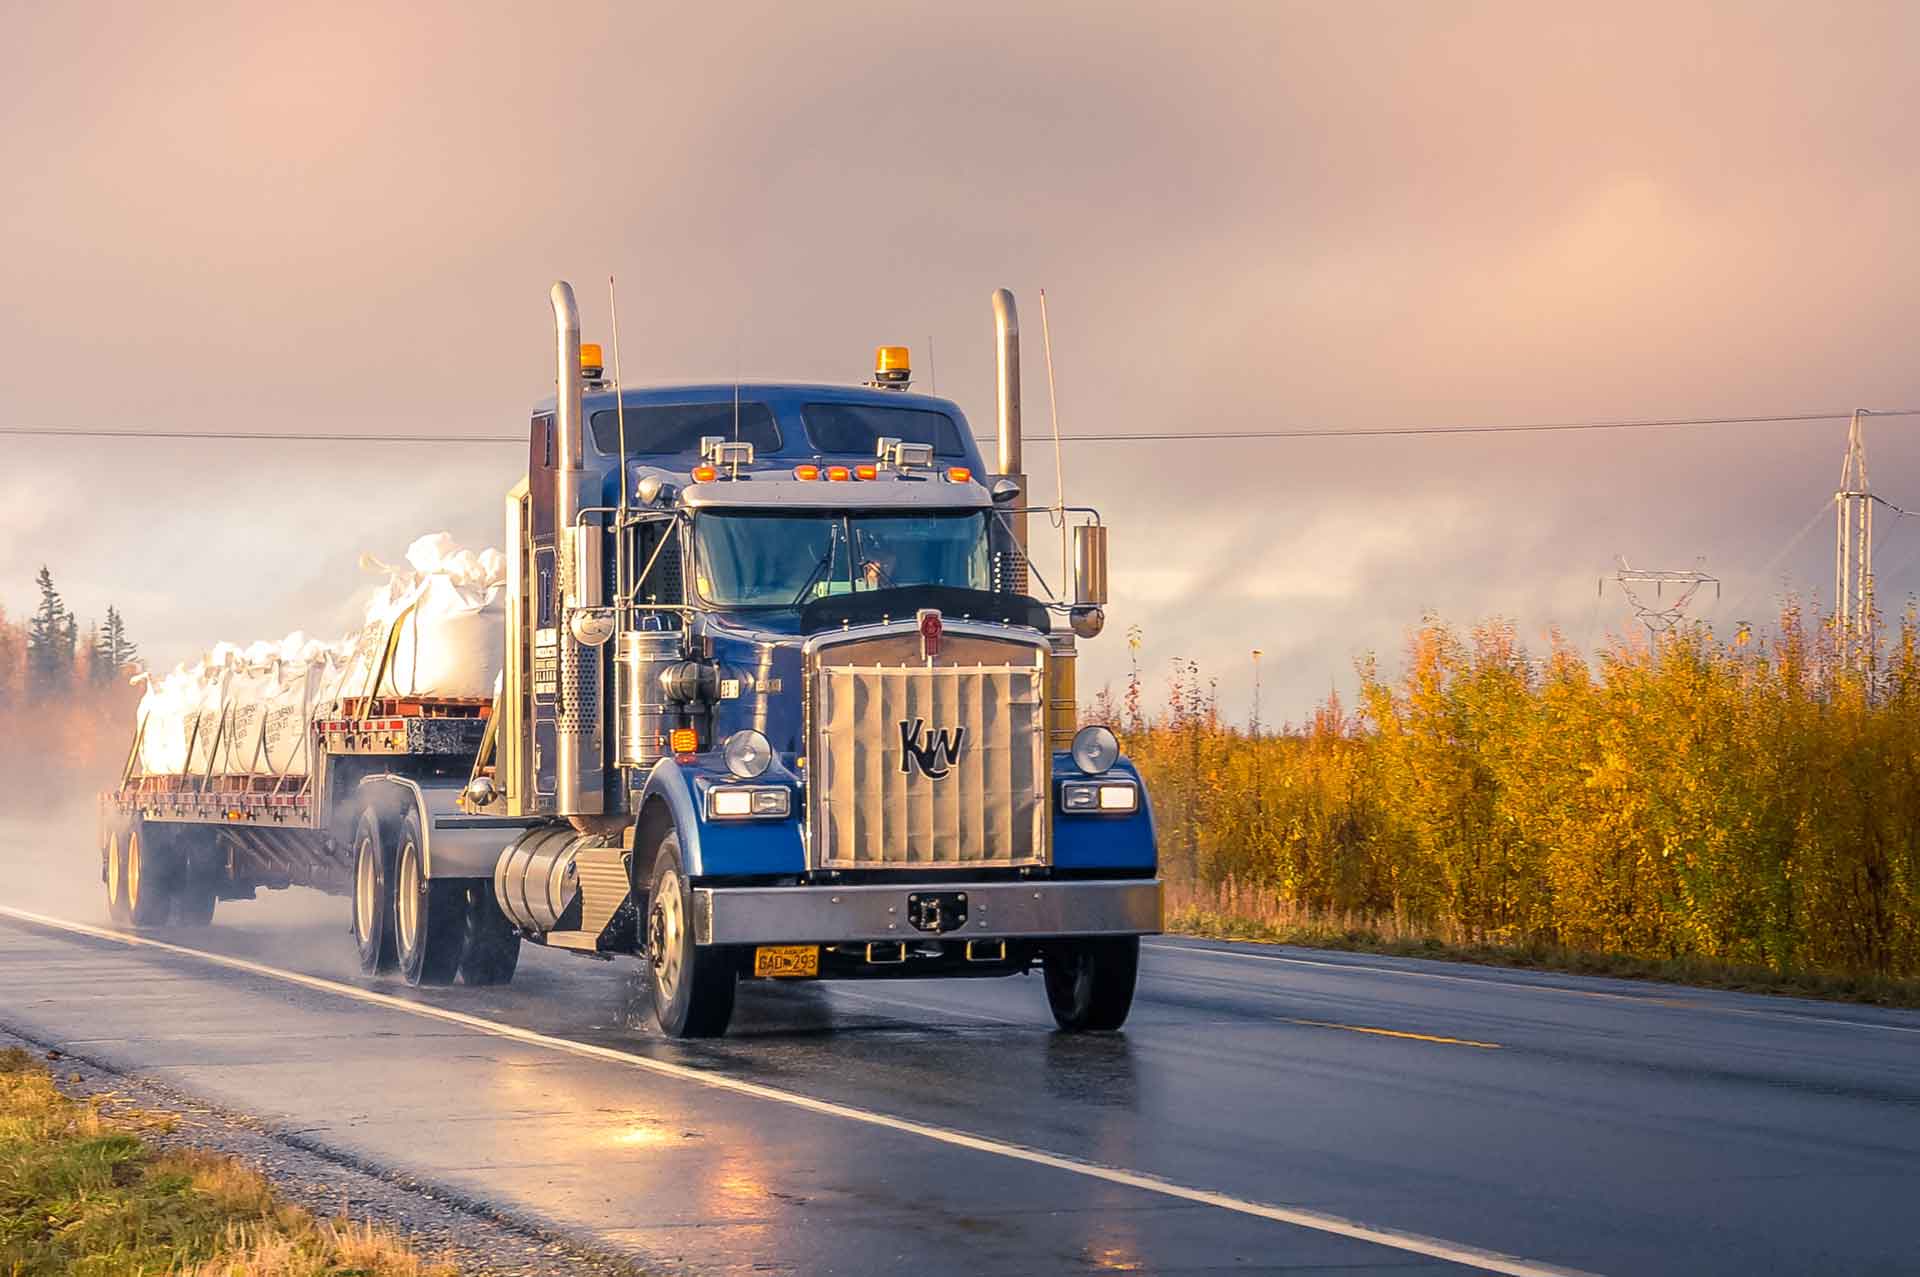 Things You Need To Know For Obtaining Truck Permits and Service Contracts